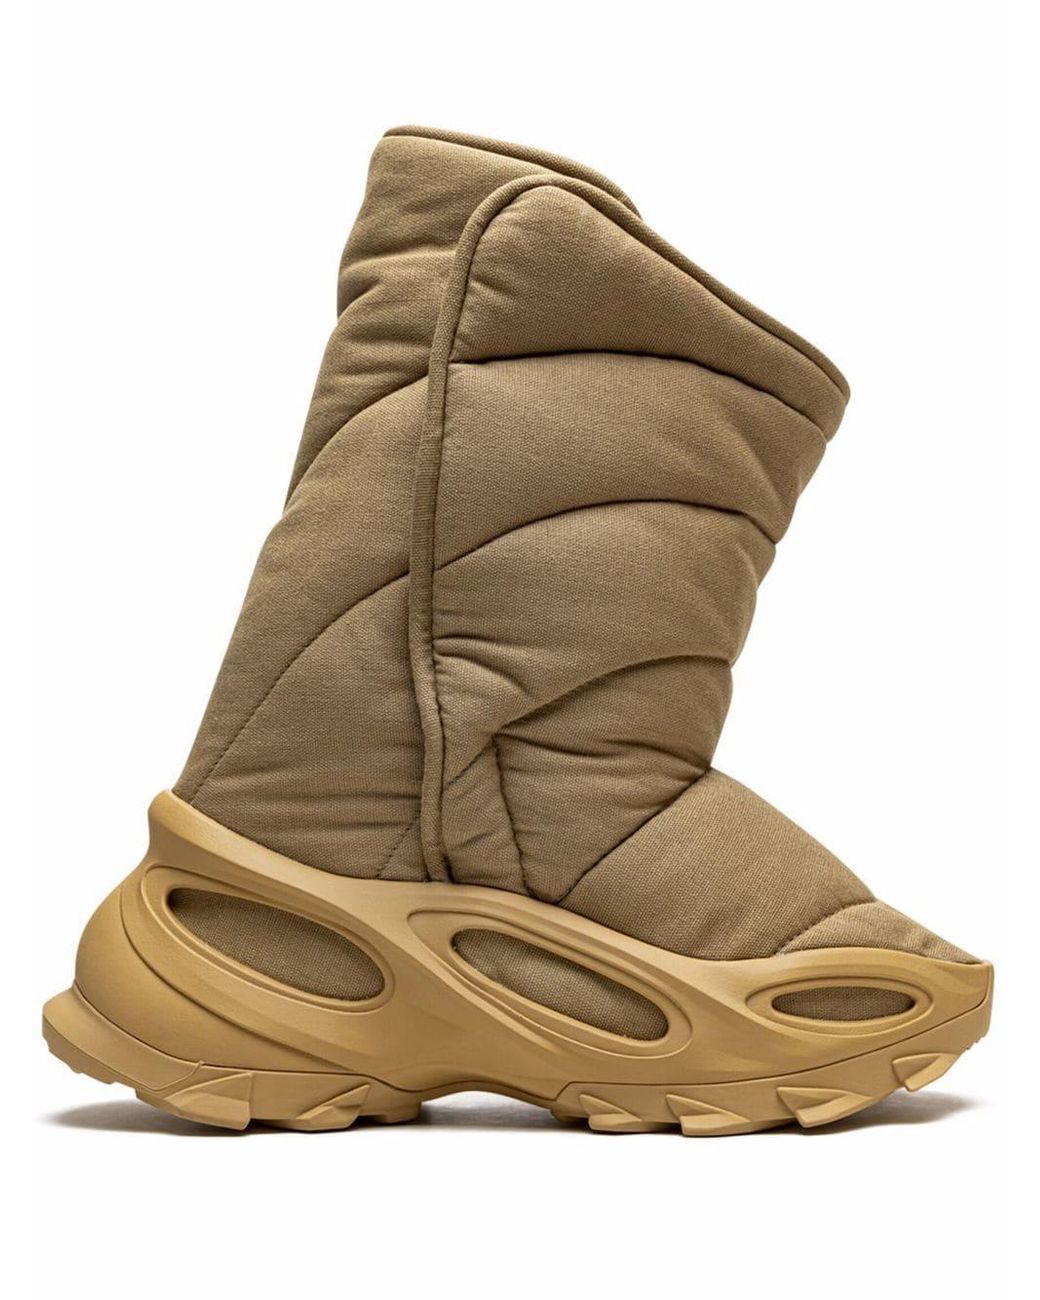 Yeezy Yeezy Insulated Boots for Men Lyst